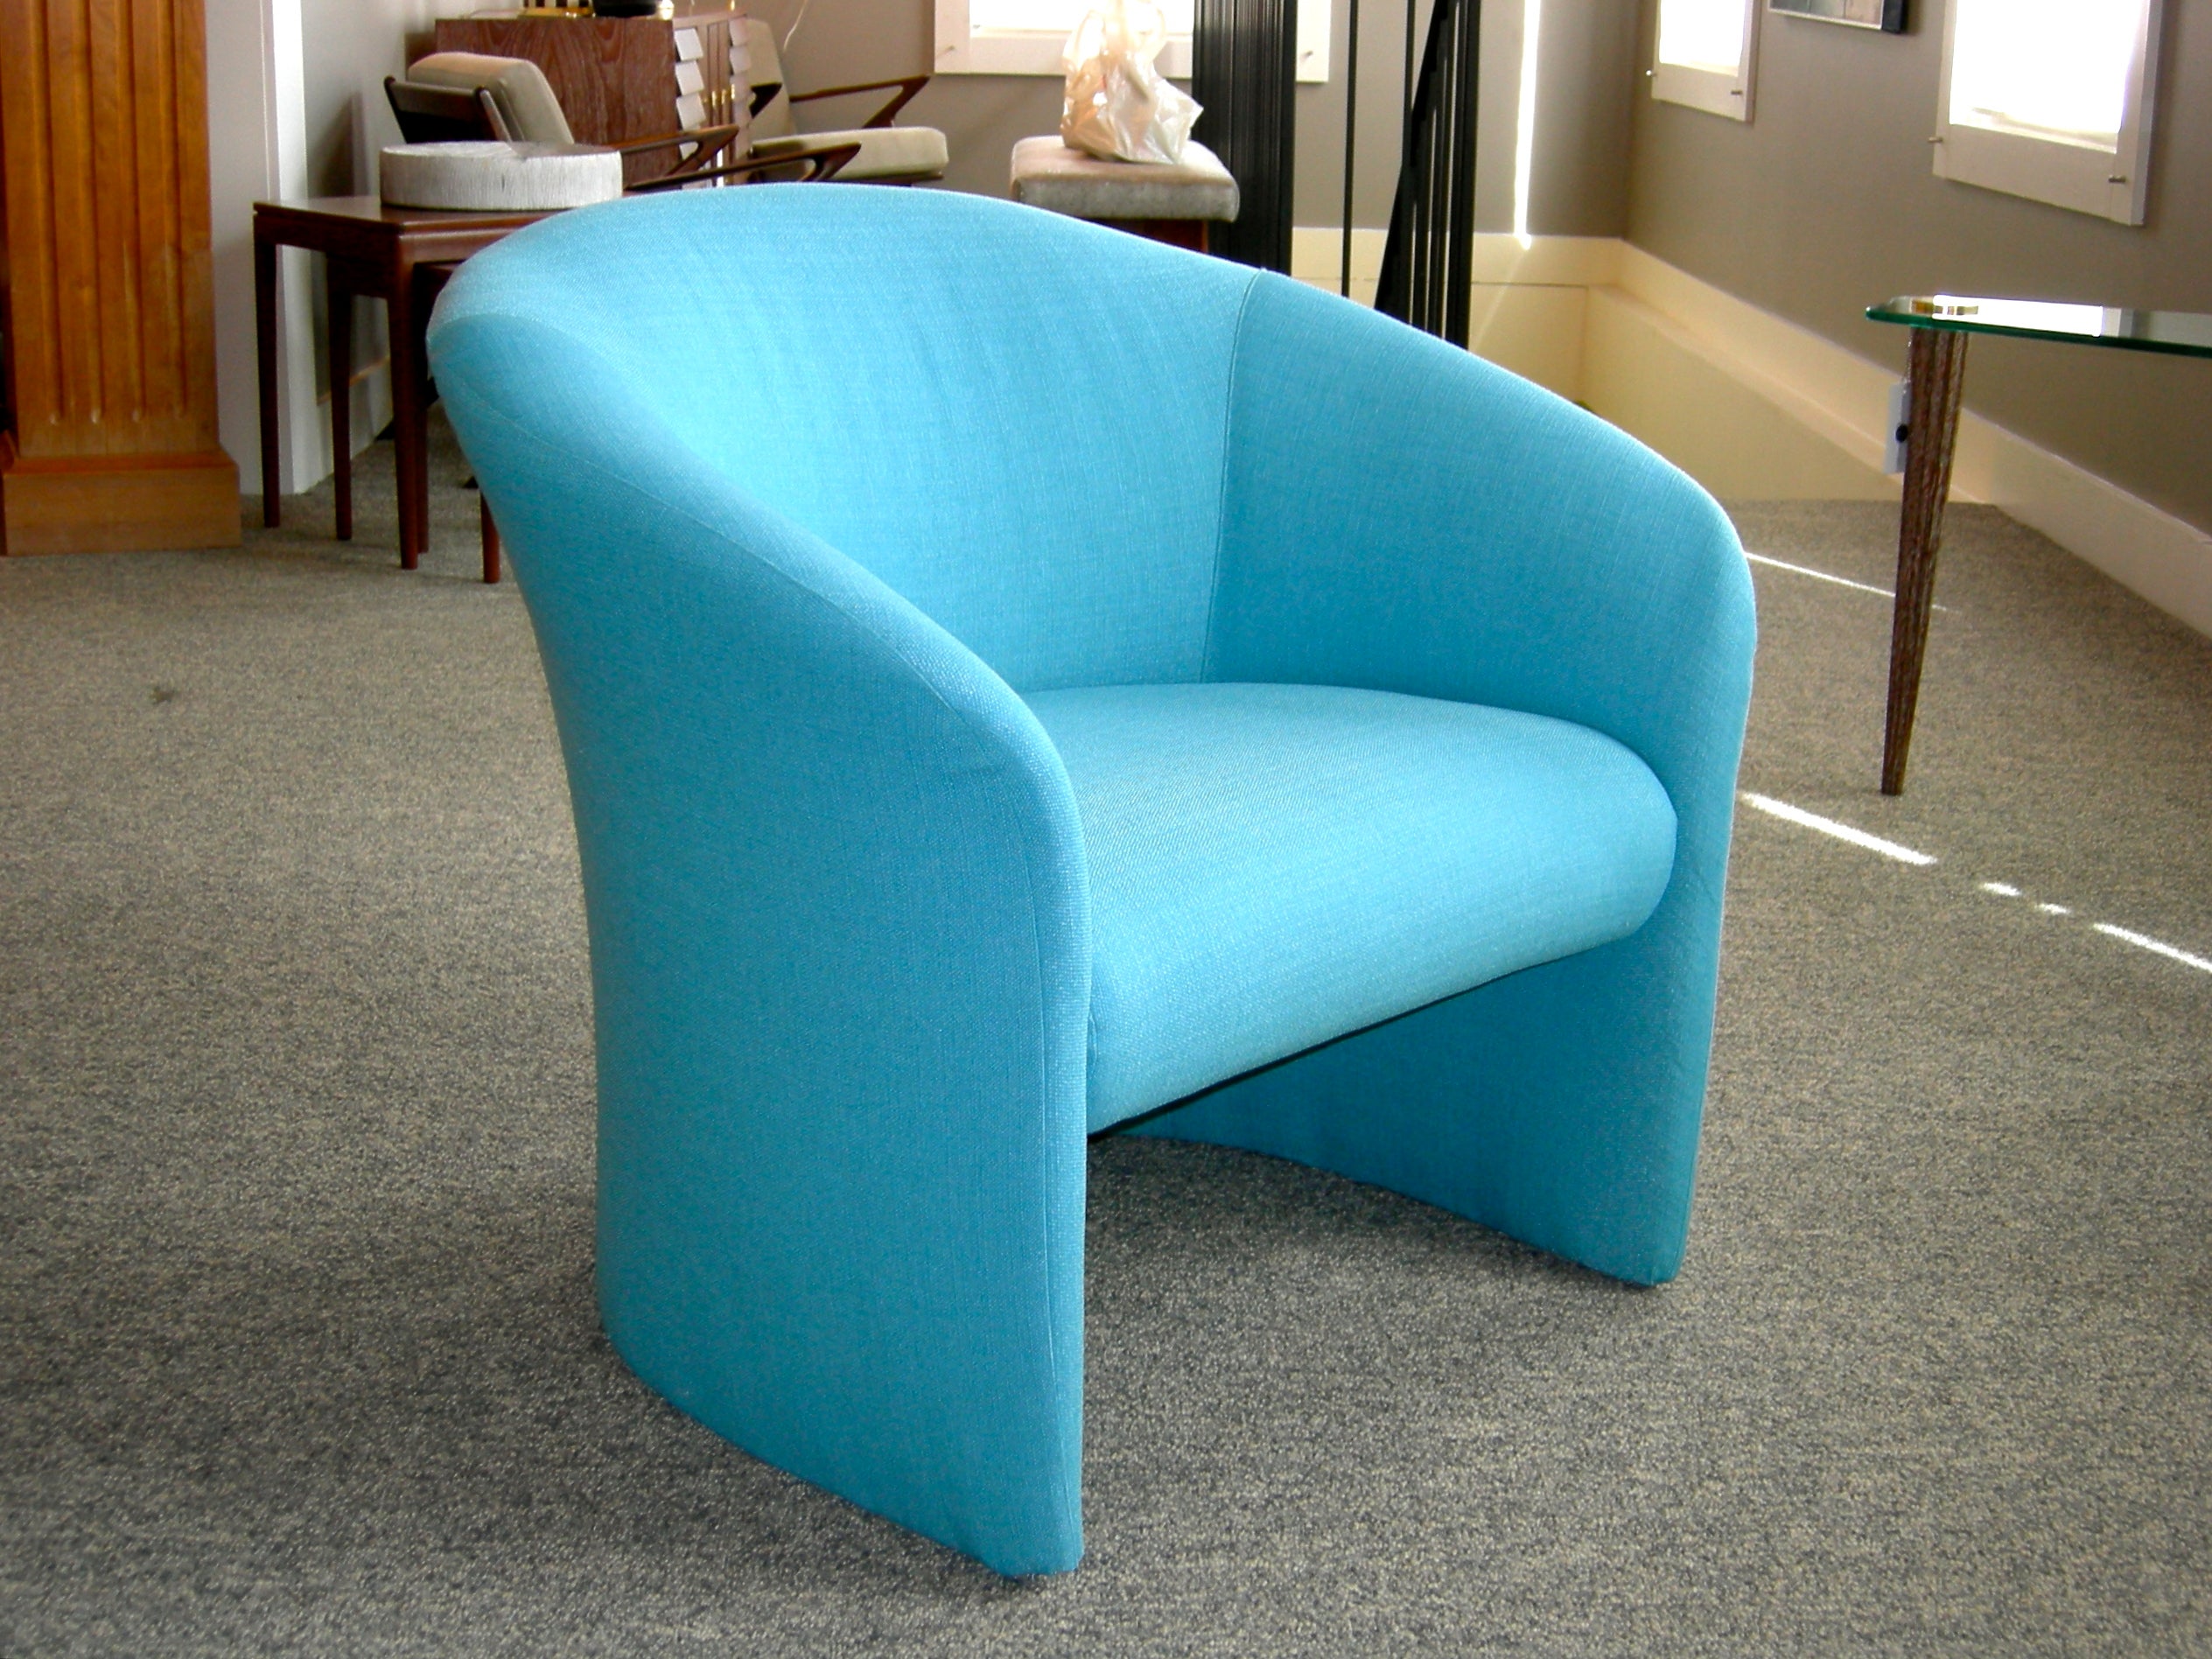 Pair of Tiffany Blue Accent Chairs by Massimo Vignelli